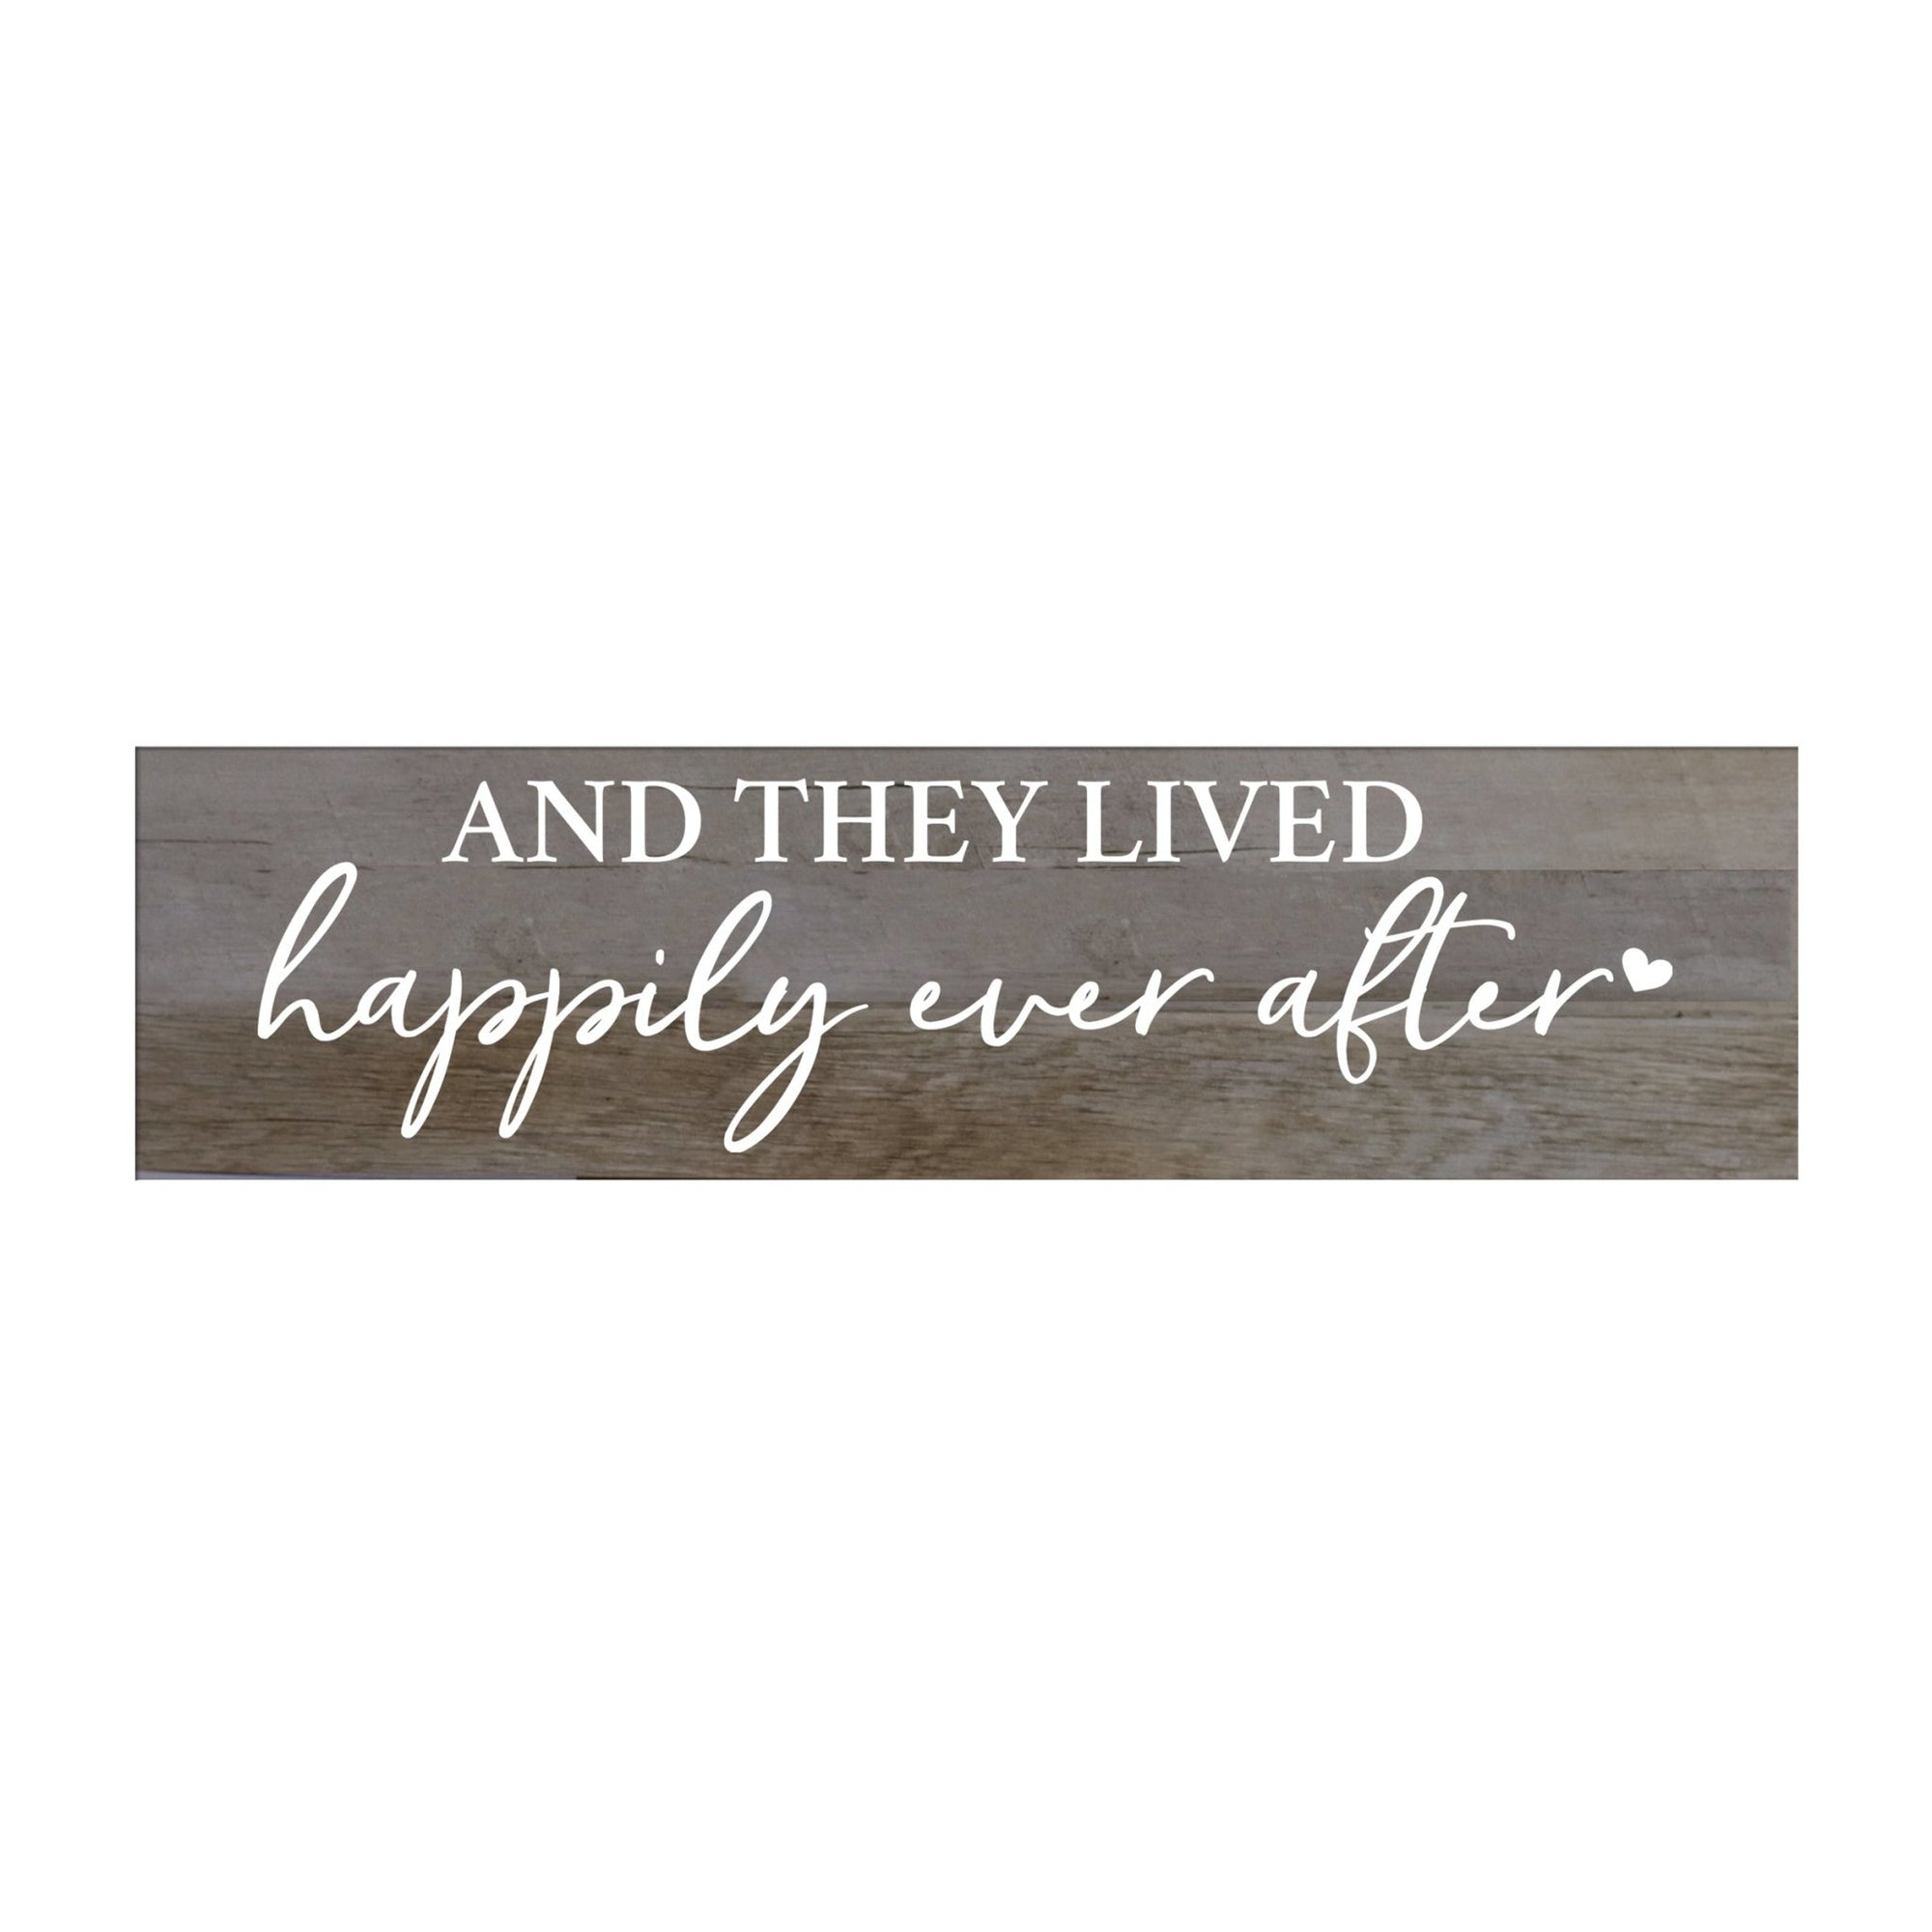 Inspirational Everyday Home and Family Wooden Wall Art Hanging Plaque 10 x 40 – Happily Ever After - LifeSong Milestones